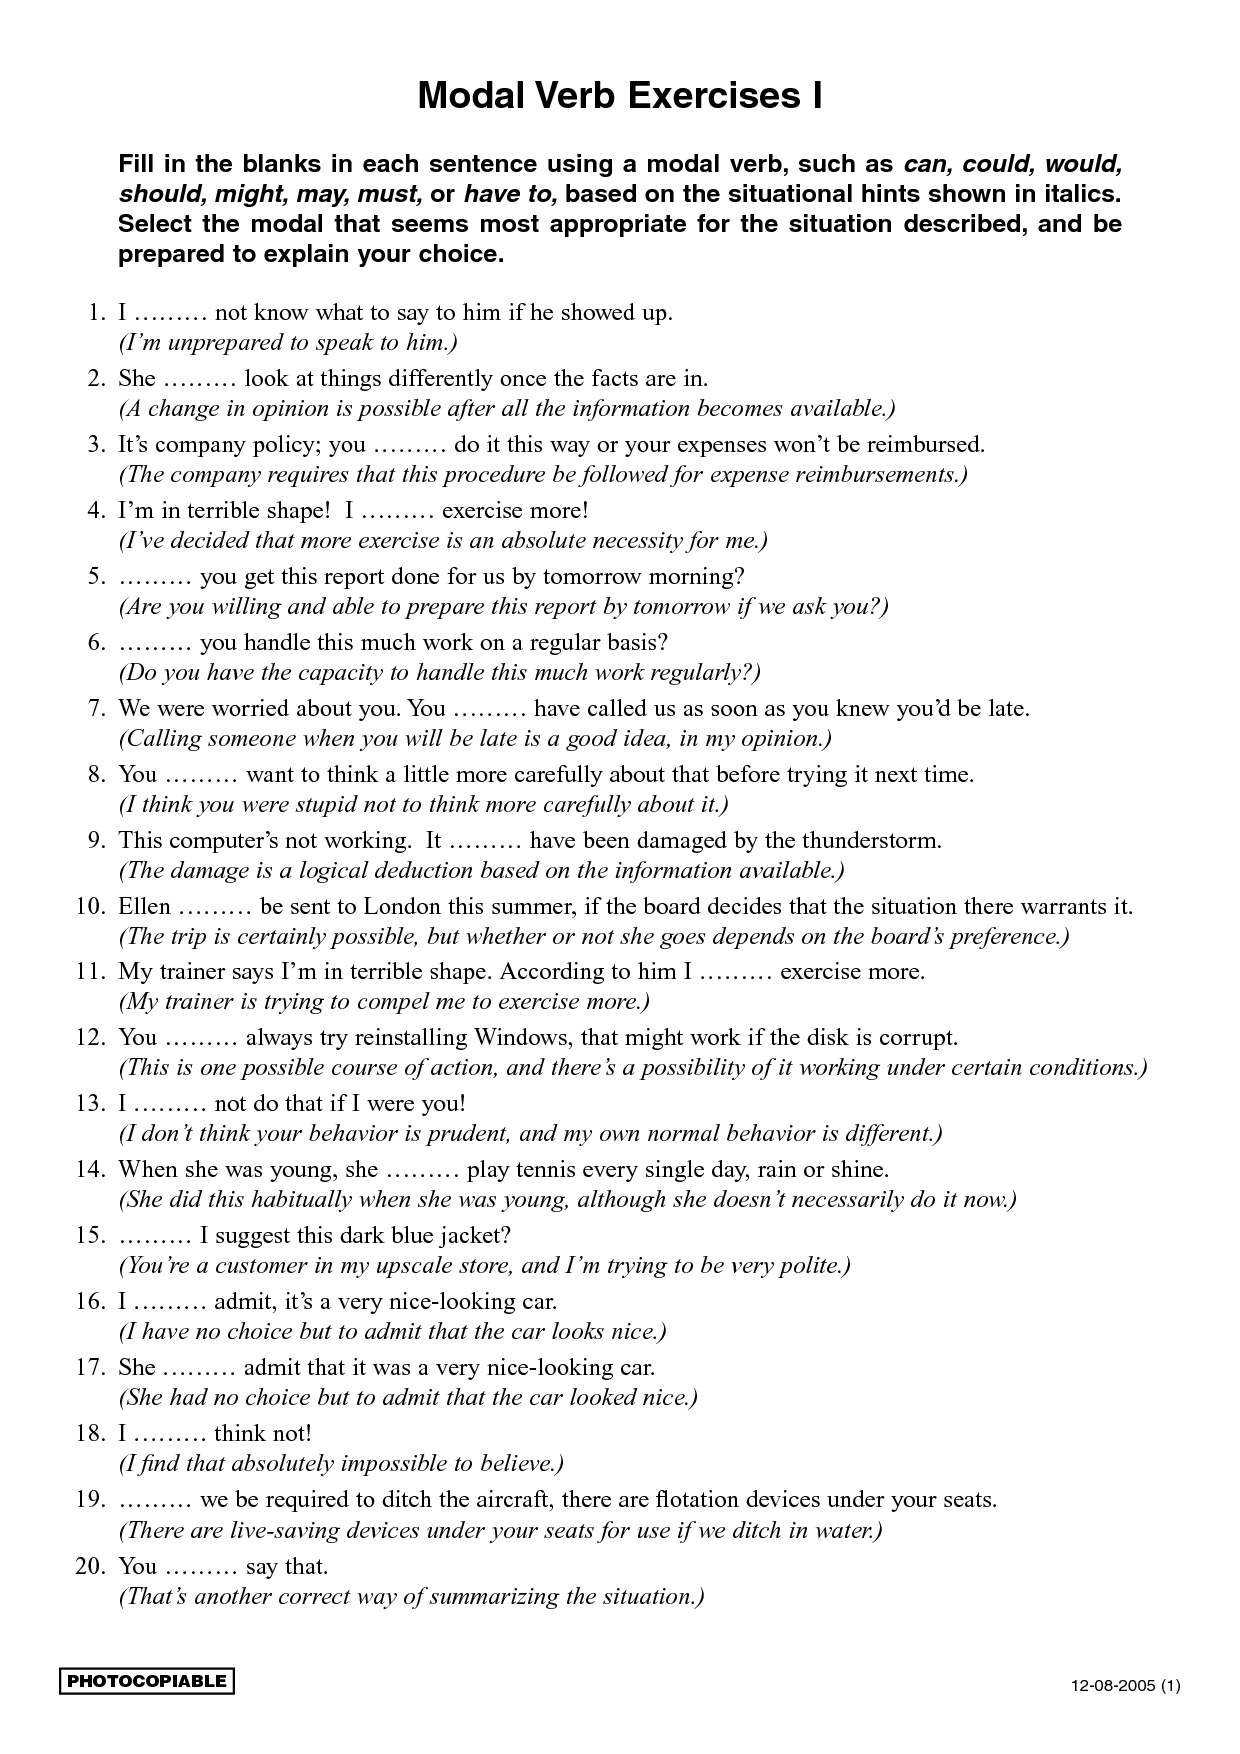 14-best-images-of-modals-esl-worksheets-modal-auxiliary-verbs